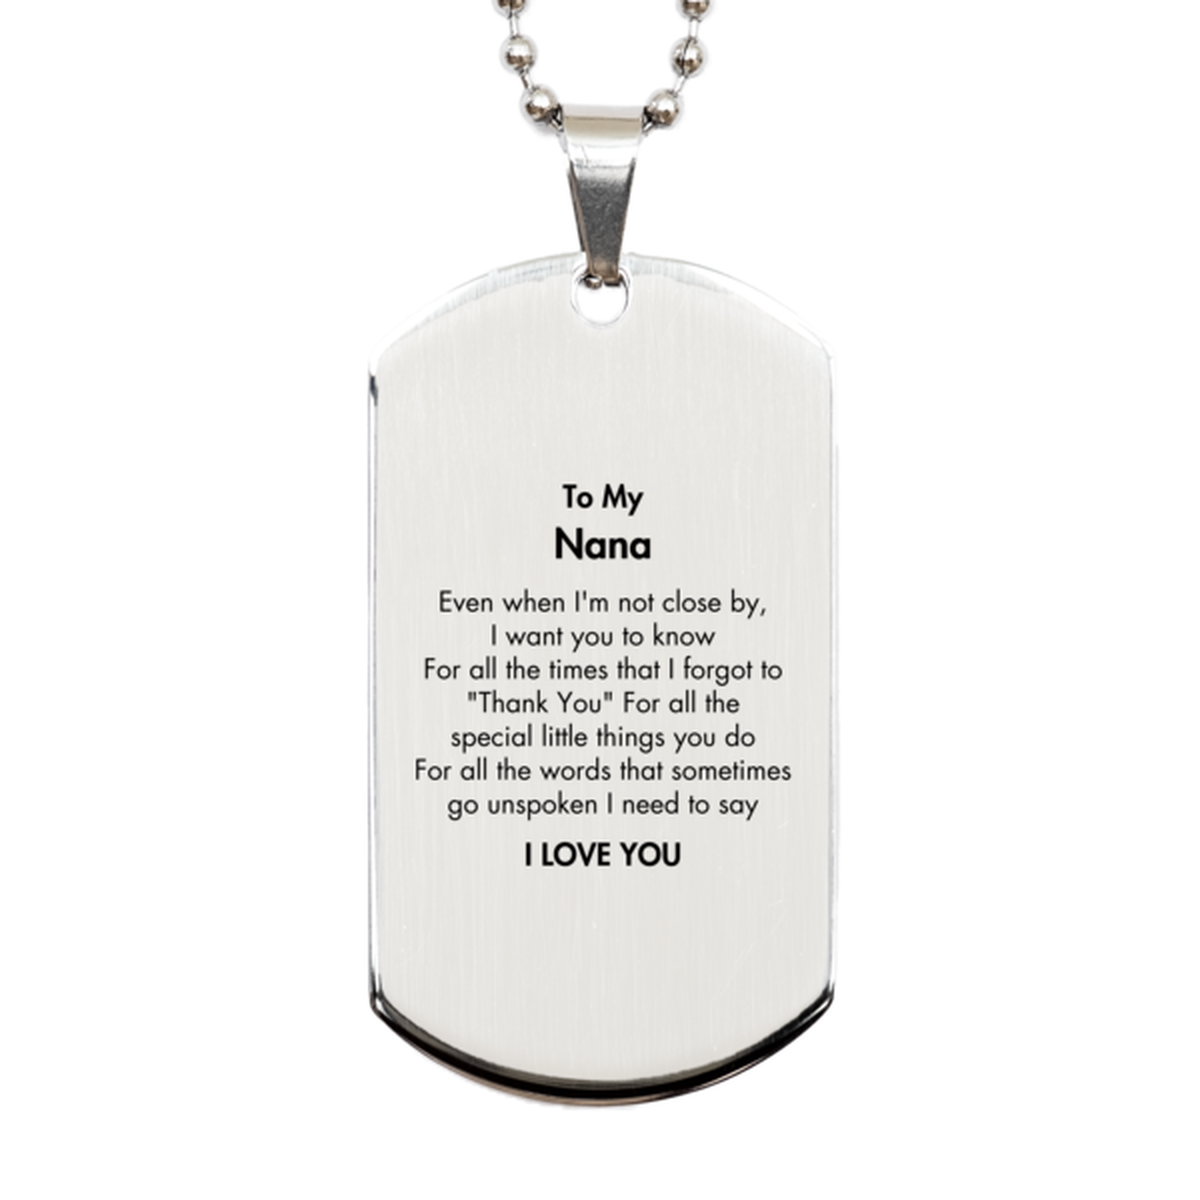 Thank You Gifts for Nana, Keepsake Silver Dog Tag Gifts for Nana Birthday Mother's day Father's Day Nana For all the words That sometimes go unspoken I need to say I LOVE YOU